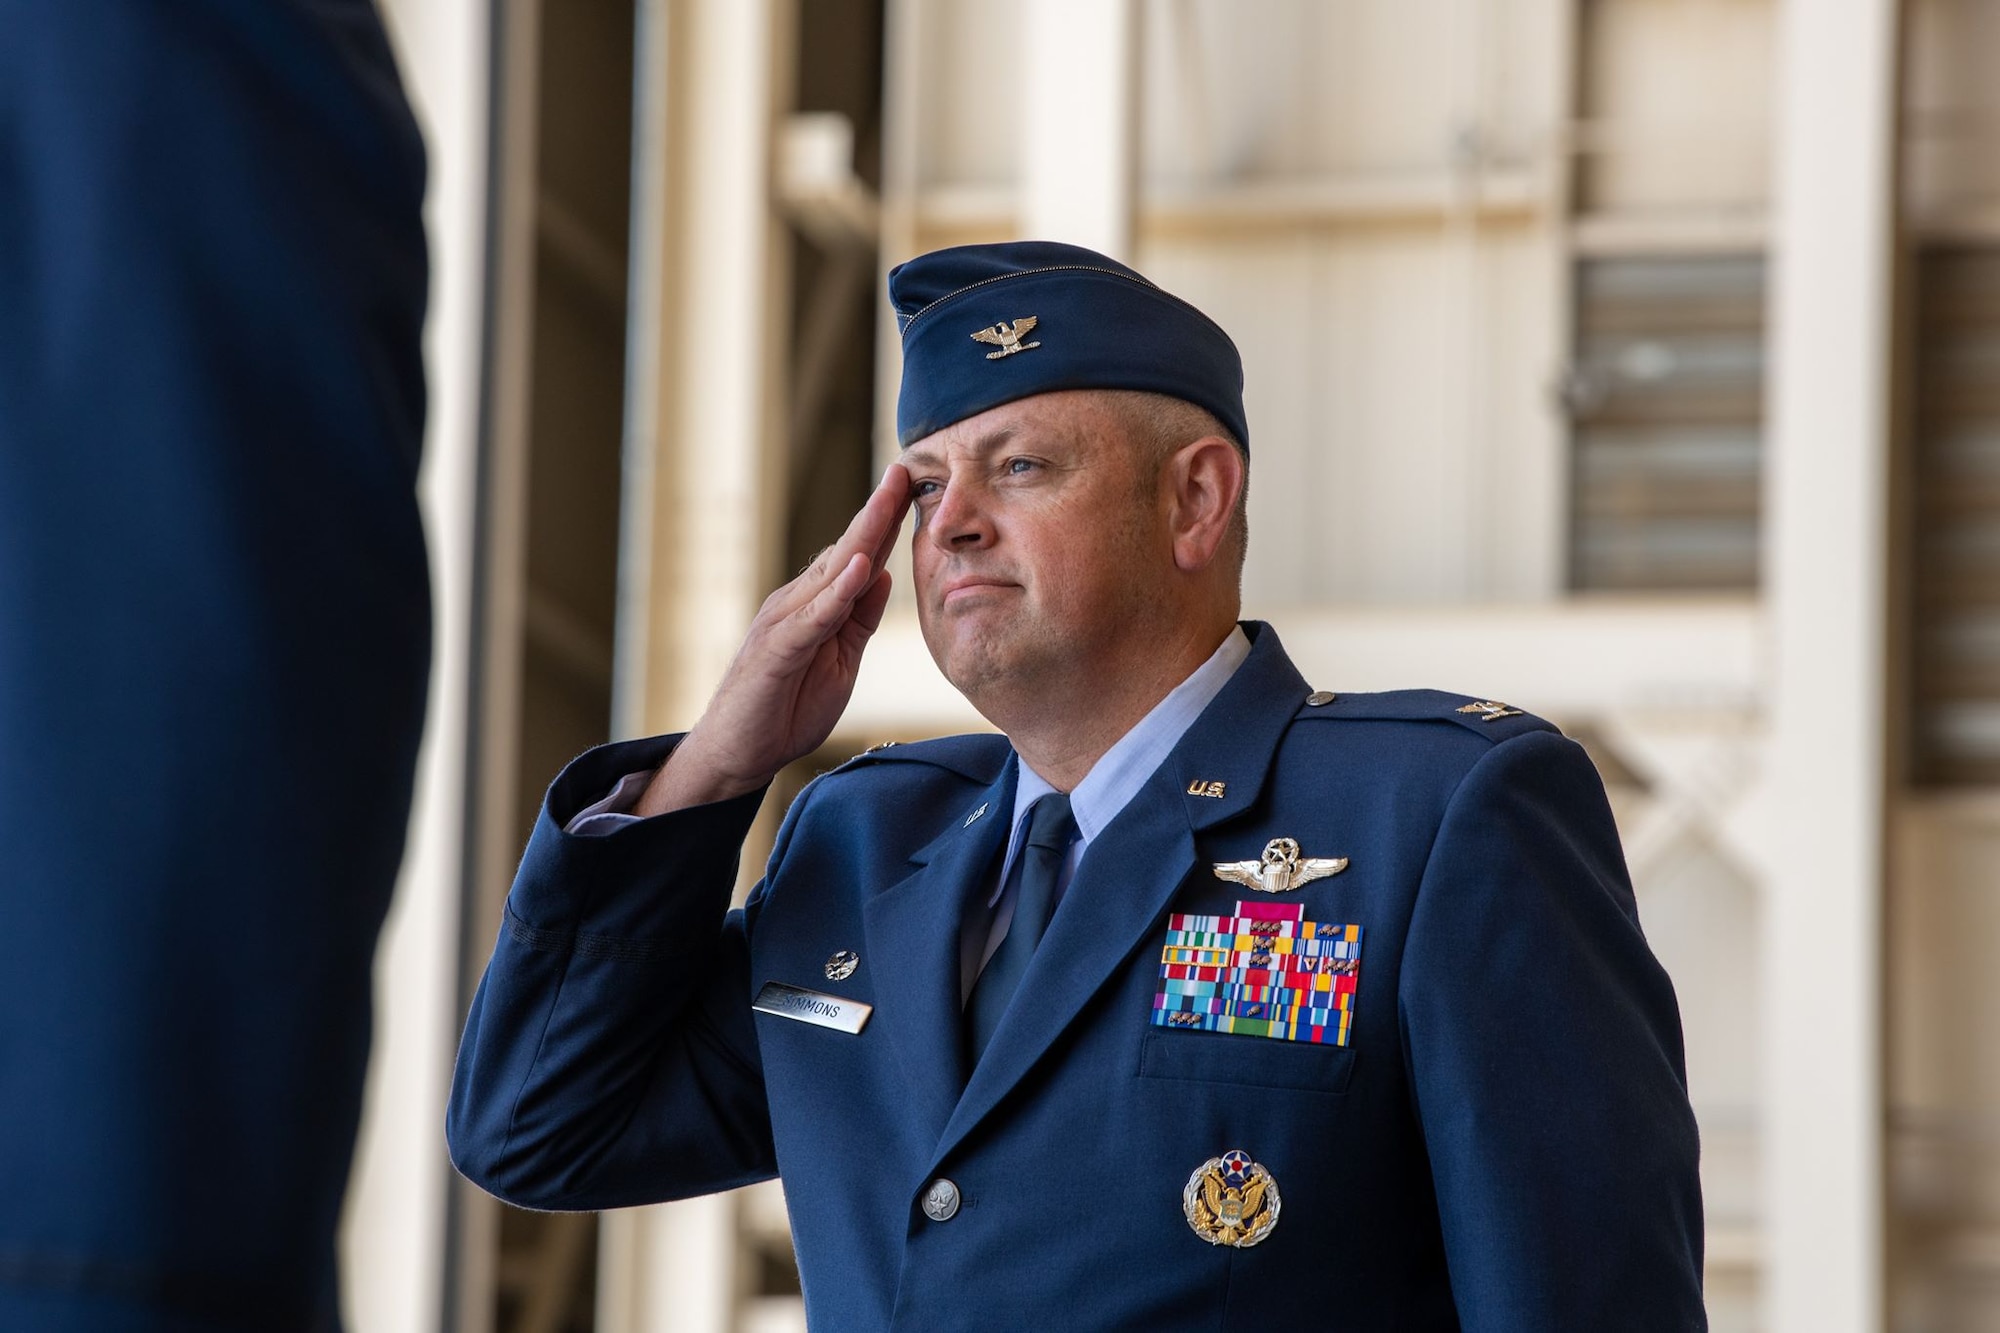 A man in dress uniform salutes. His face is determined.